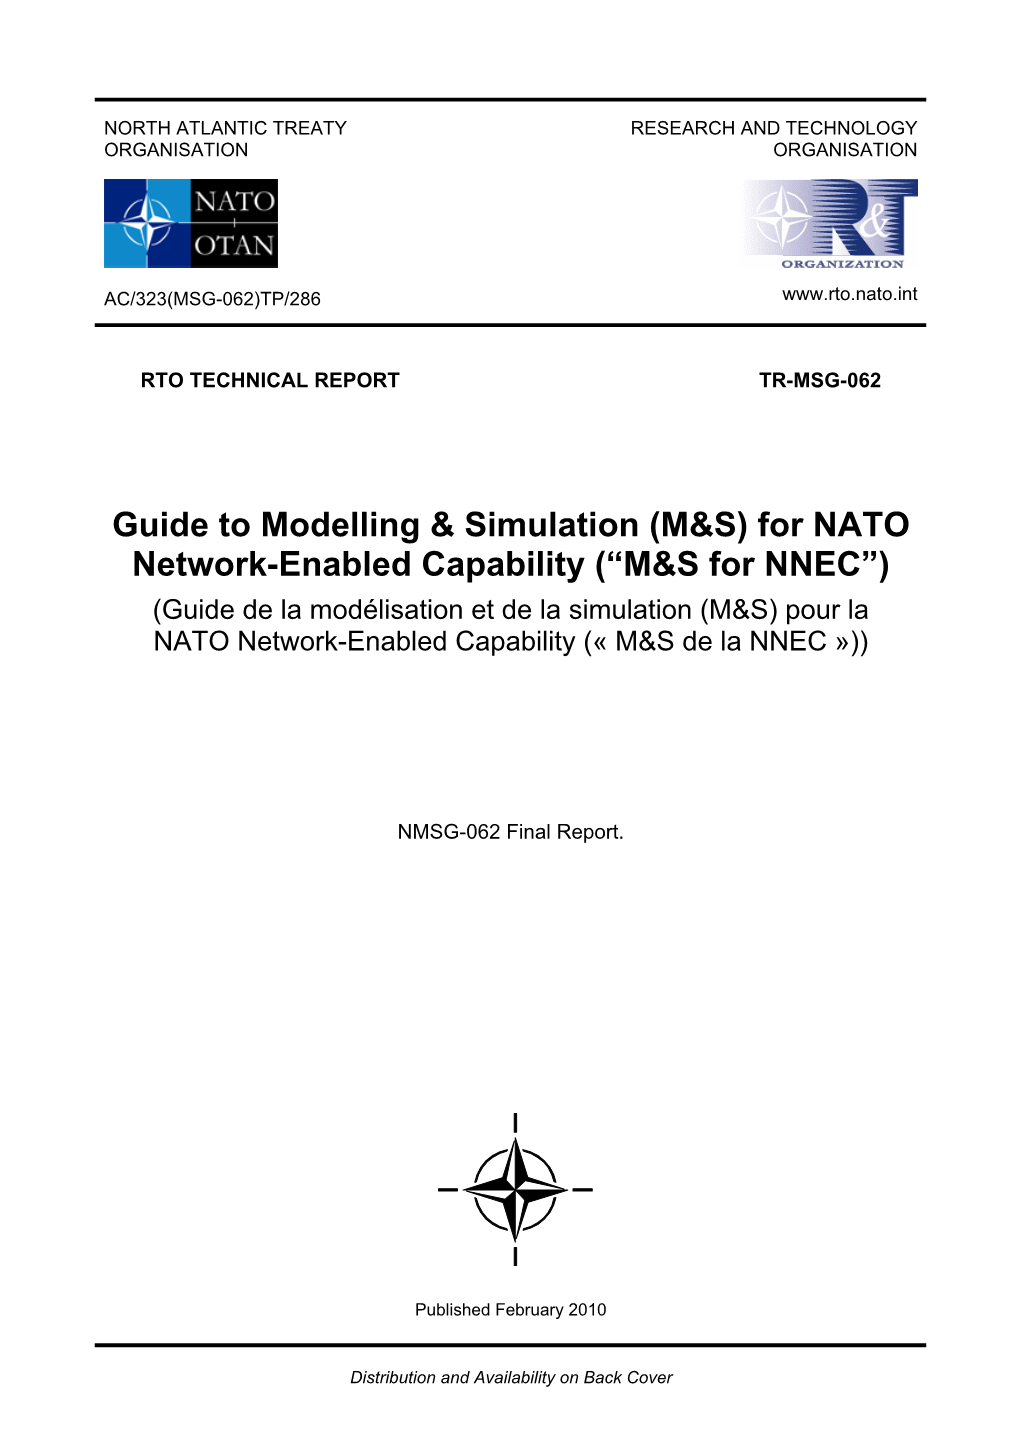 Guide to Modelling & Simulation (M&S) for NATO Network-Enabled Capability (“M&S for NNEC”)